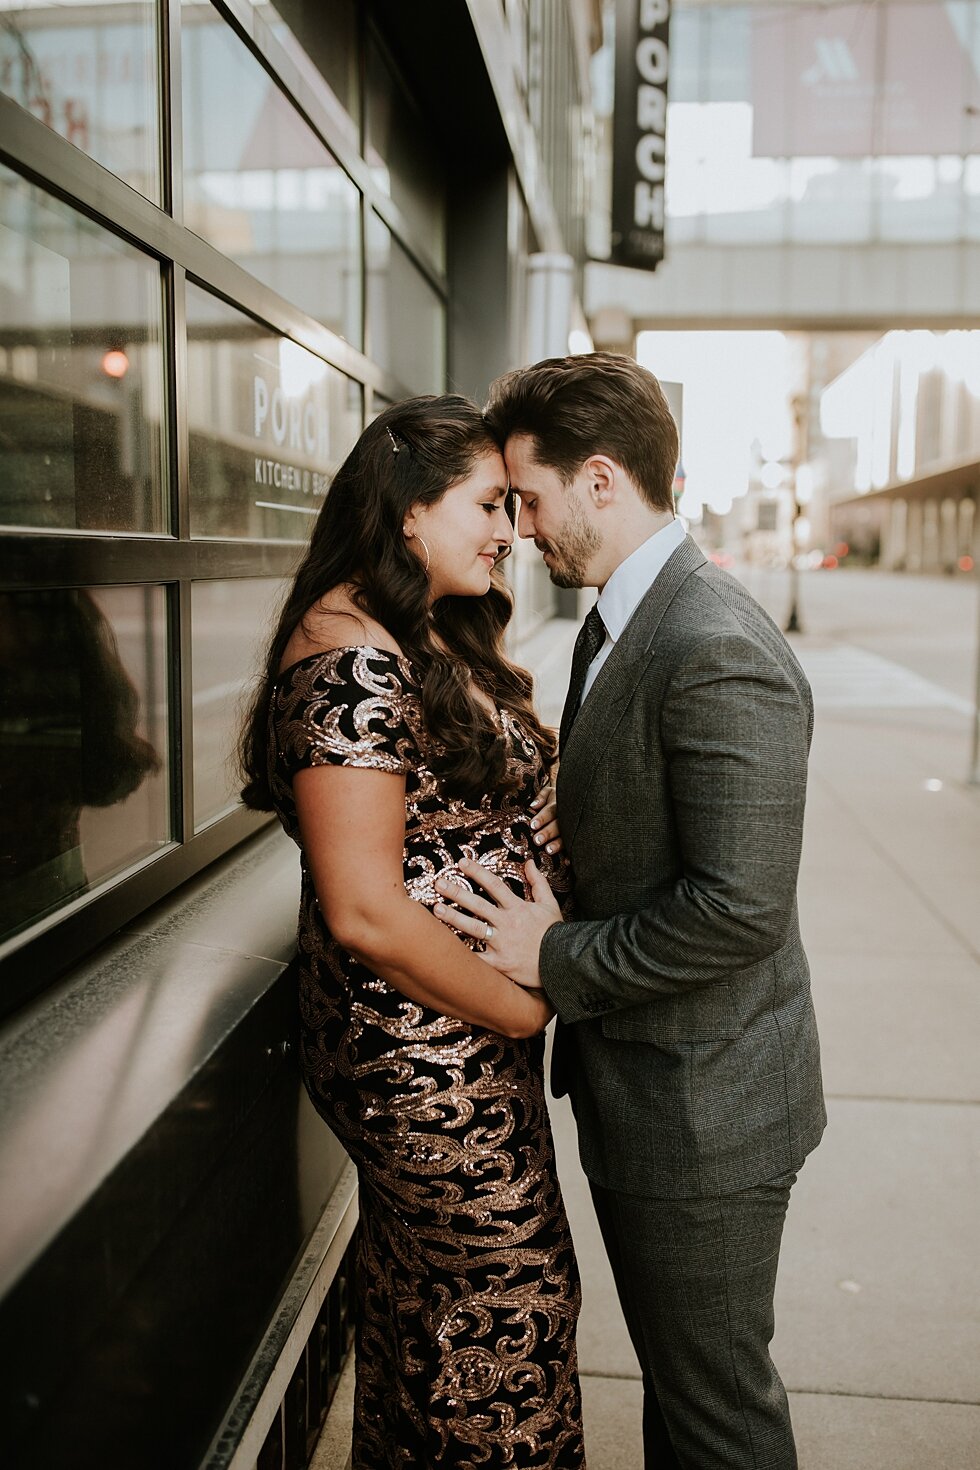  Outside of this beautiful Louisville, Kentucky building where this couple decided to wear formal attire for their elegant and sophisticated maternity session. #maternitygoals #maternityphotographer #babybump #kentuckyphotographer #fancymaternitysess